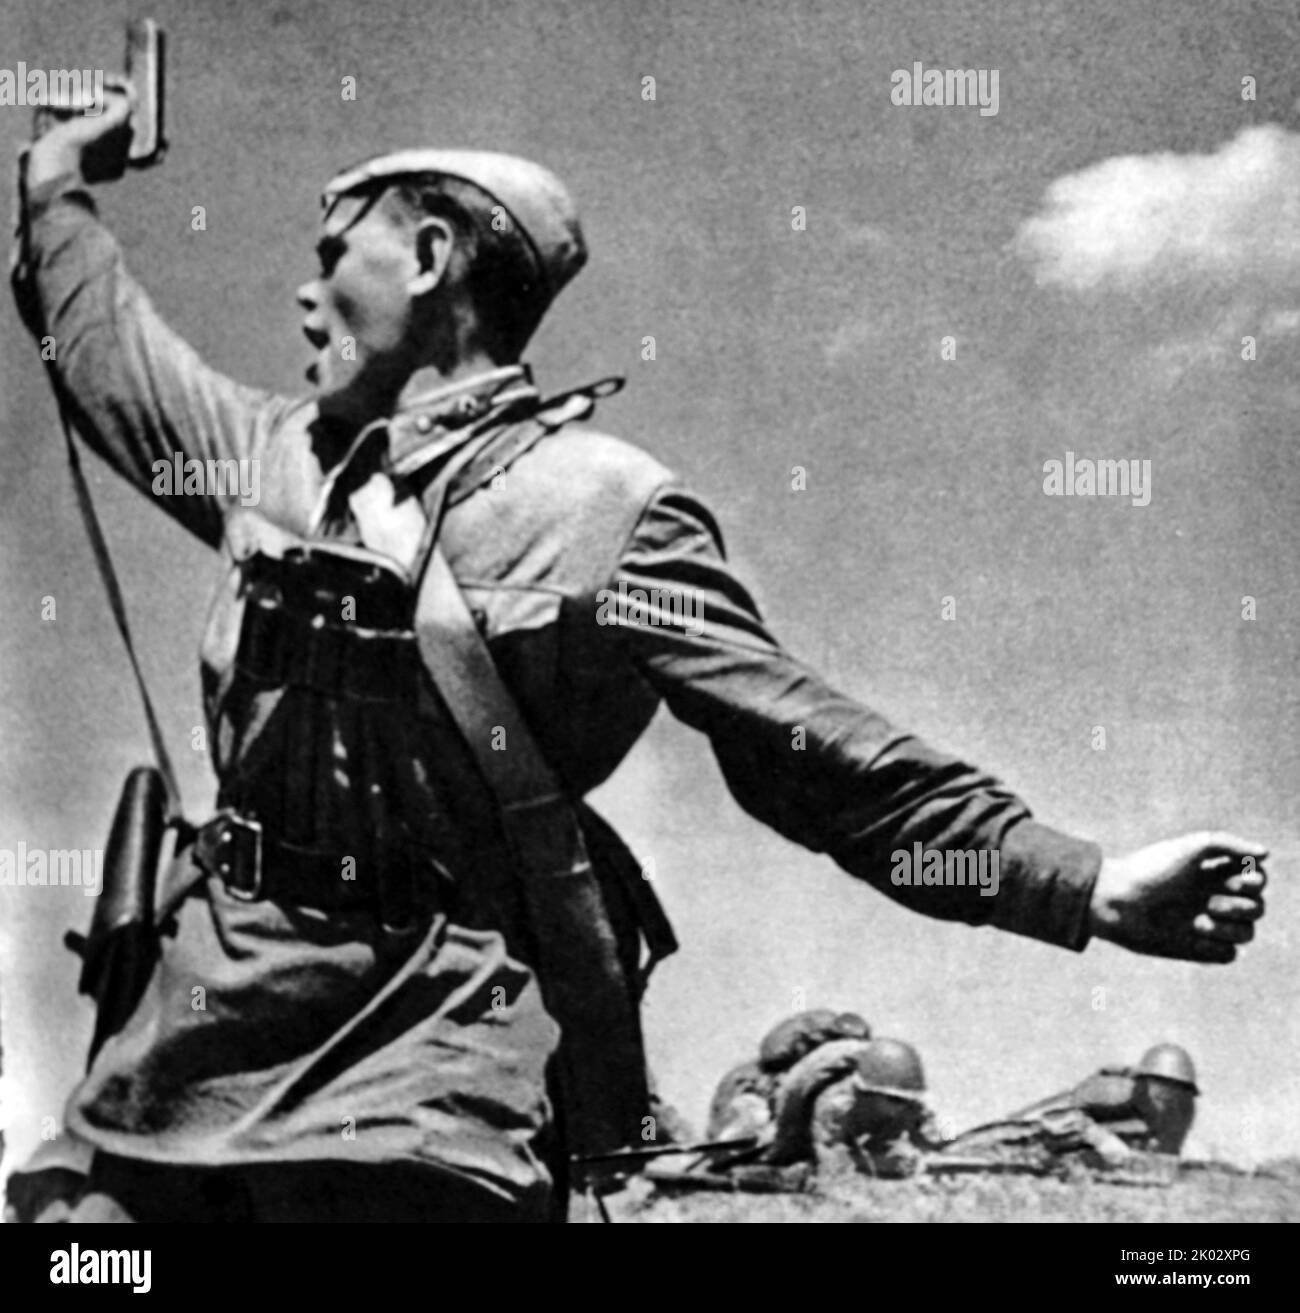 Kombat is a black-and-white photograph by the Soviet photographer Max Alpert. It depicts a Soviet military officer armed with a TT pistol who is raising his unit for an attack during World War II. This work is regarded as one of the most iconic Soviet World War II photographs, yet neither the date nor the subject is known with certainty. the photograph depicts junior politruk Aleksei Yeryomenko, minutes before his death on 12 July 1942, in Voroshilovgrad Oblast, Ukraine. Stock Photo